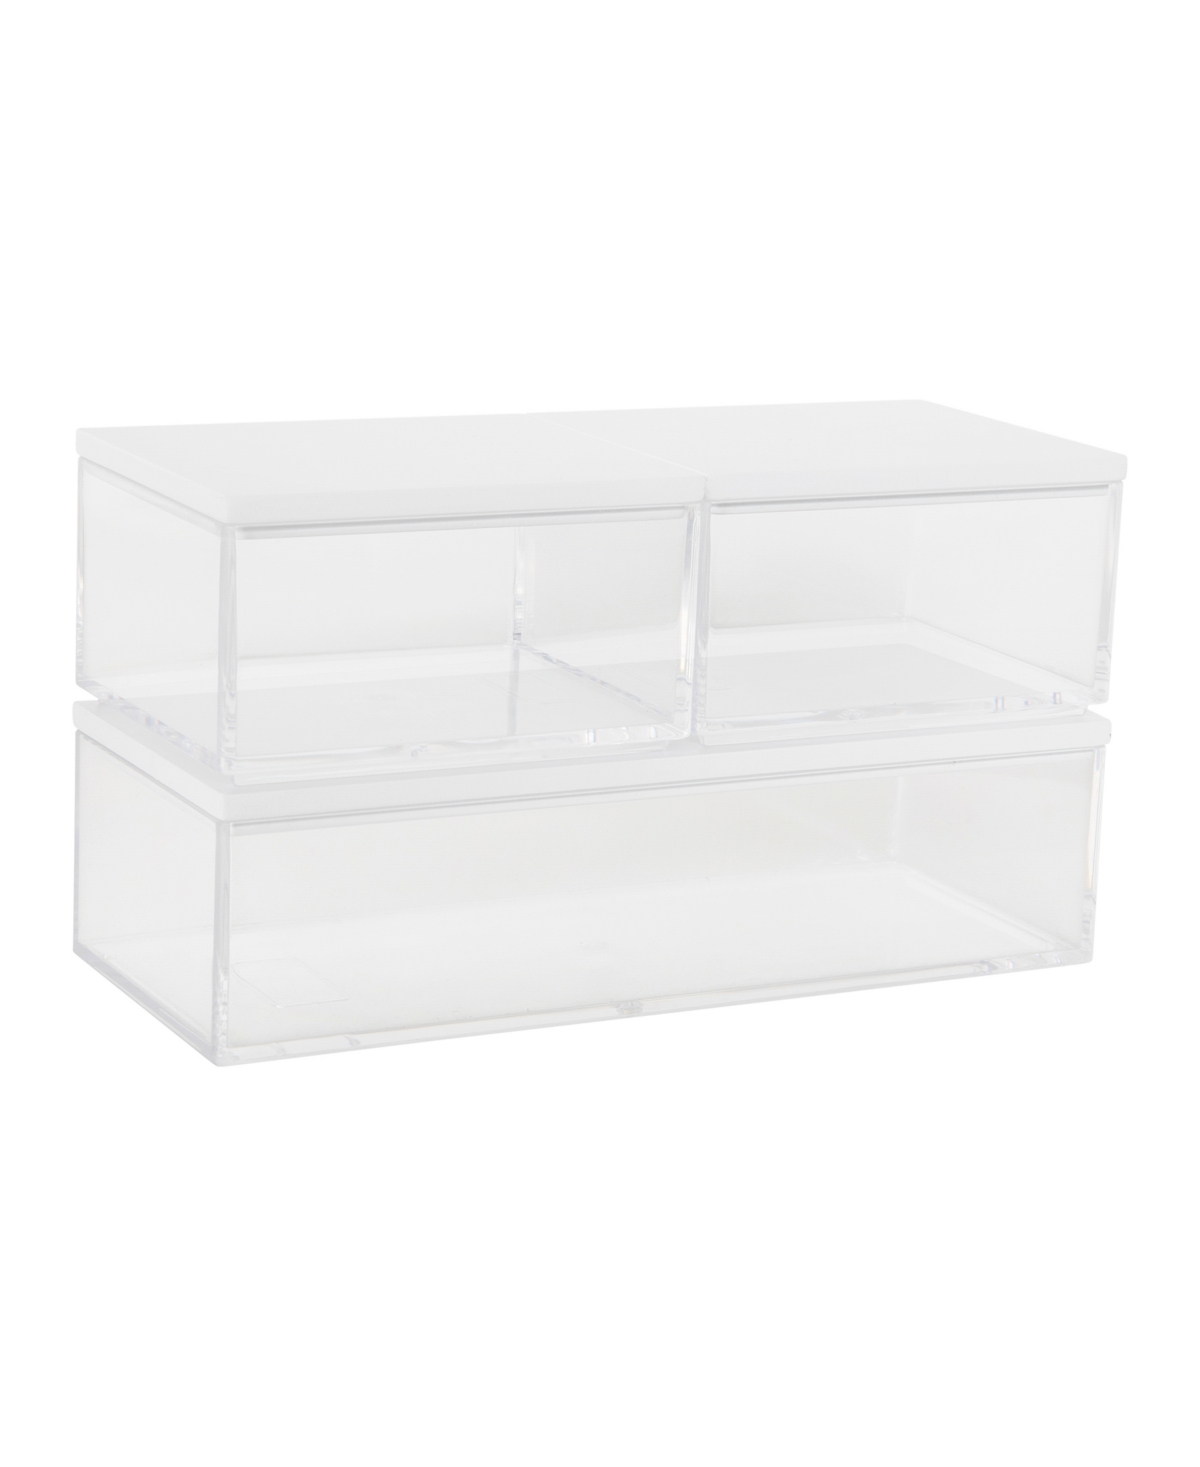 Brody Plastic Storage Organizer Bins with Engineered Wood Lids for Home Office, Kitchen, or Bathroom, 2 Small, 1 Medium - Clear, White